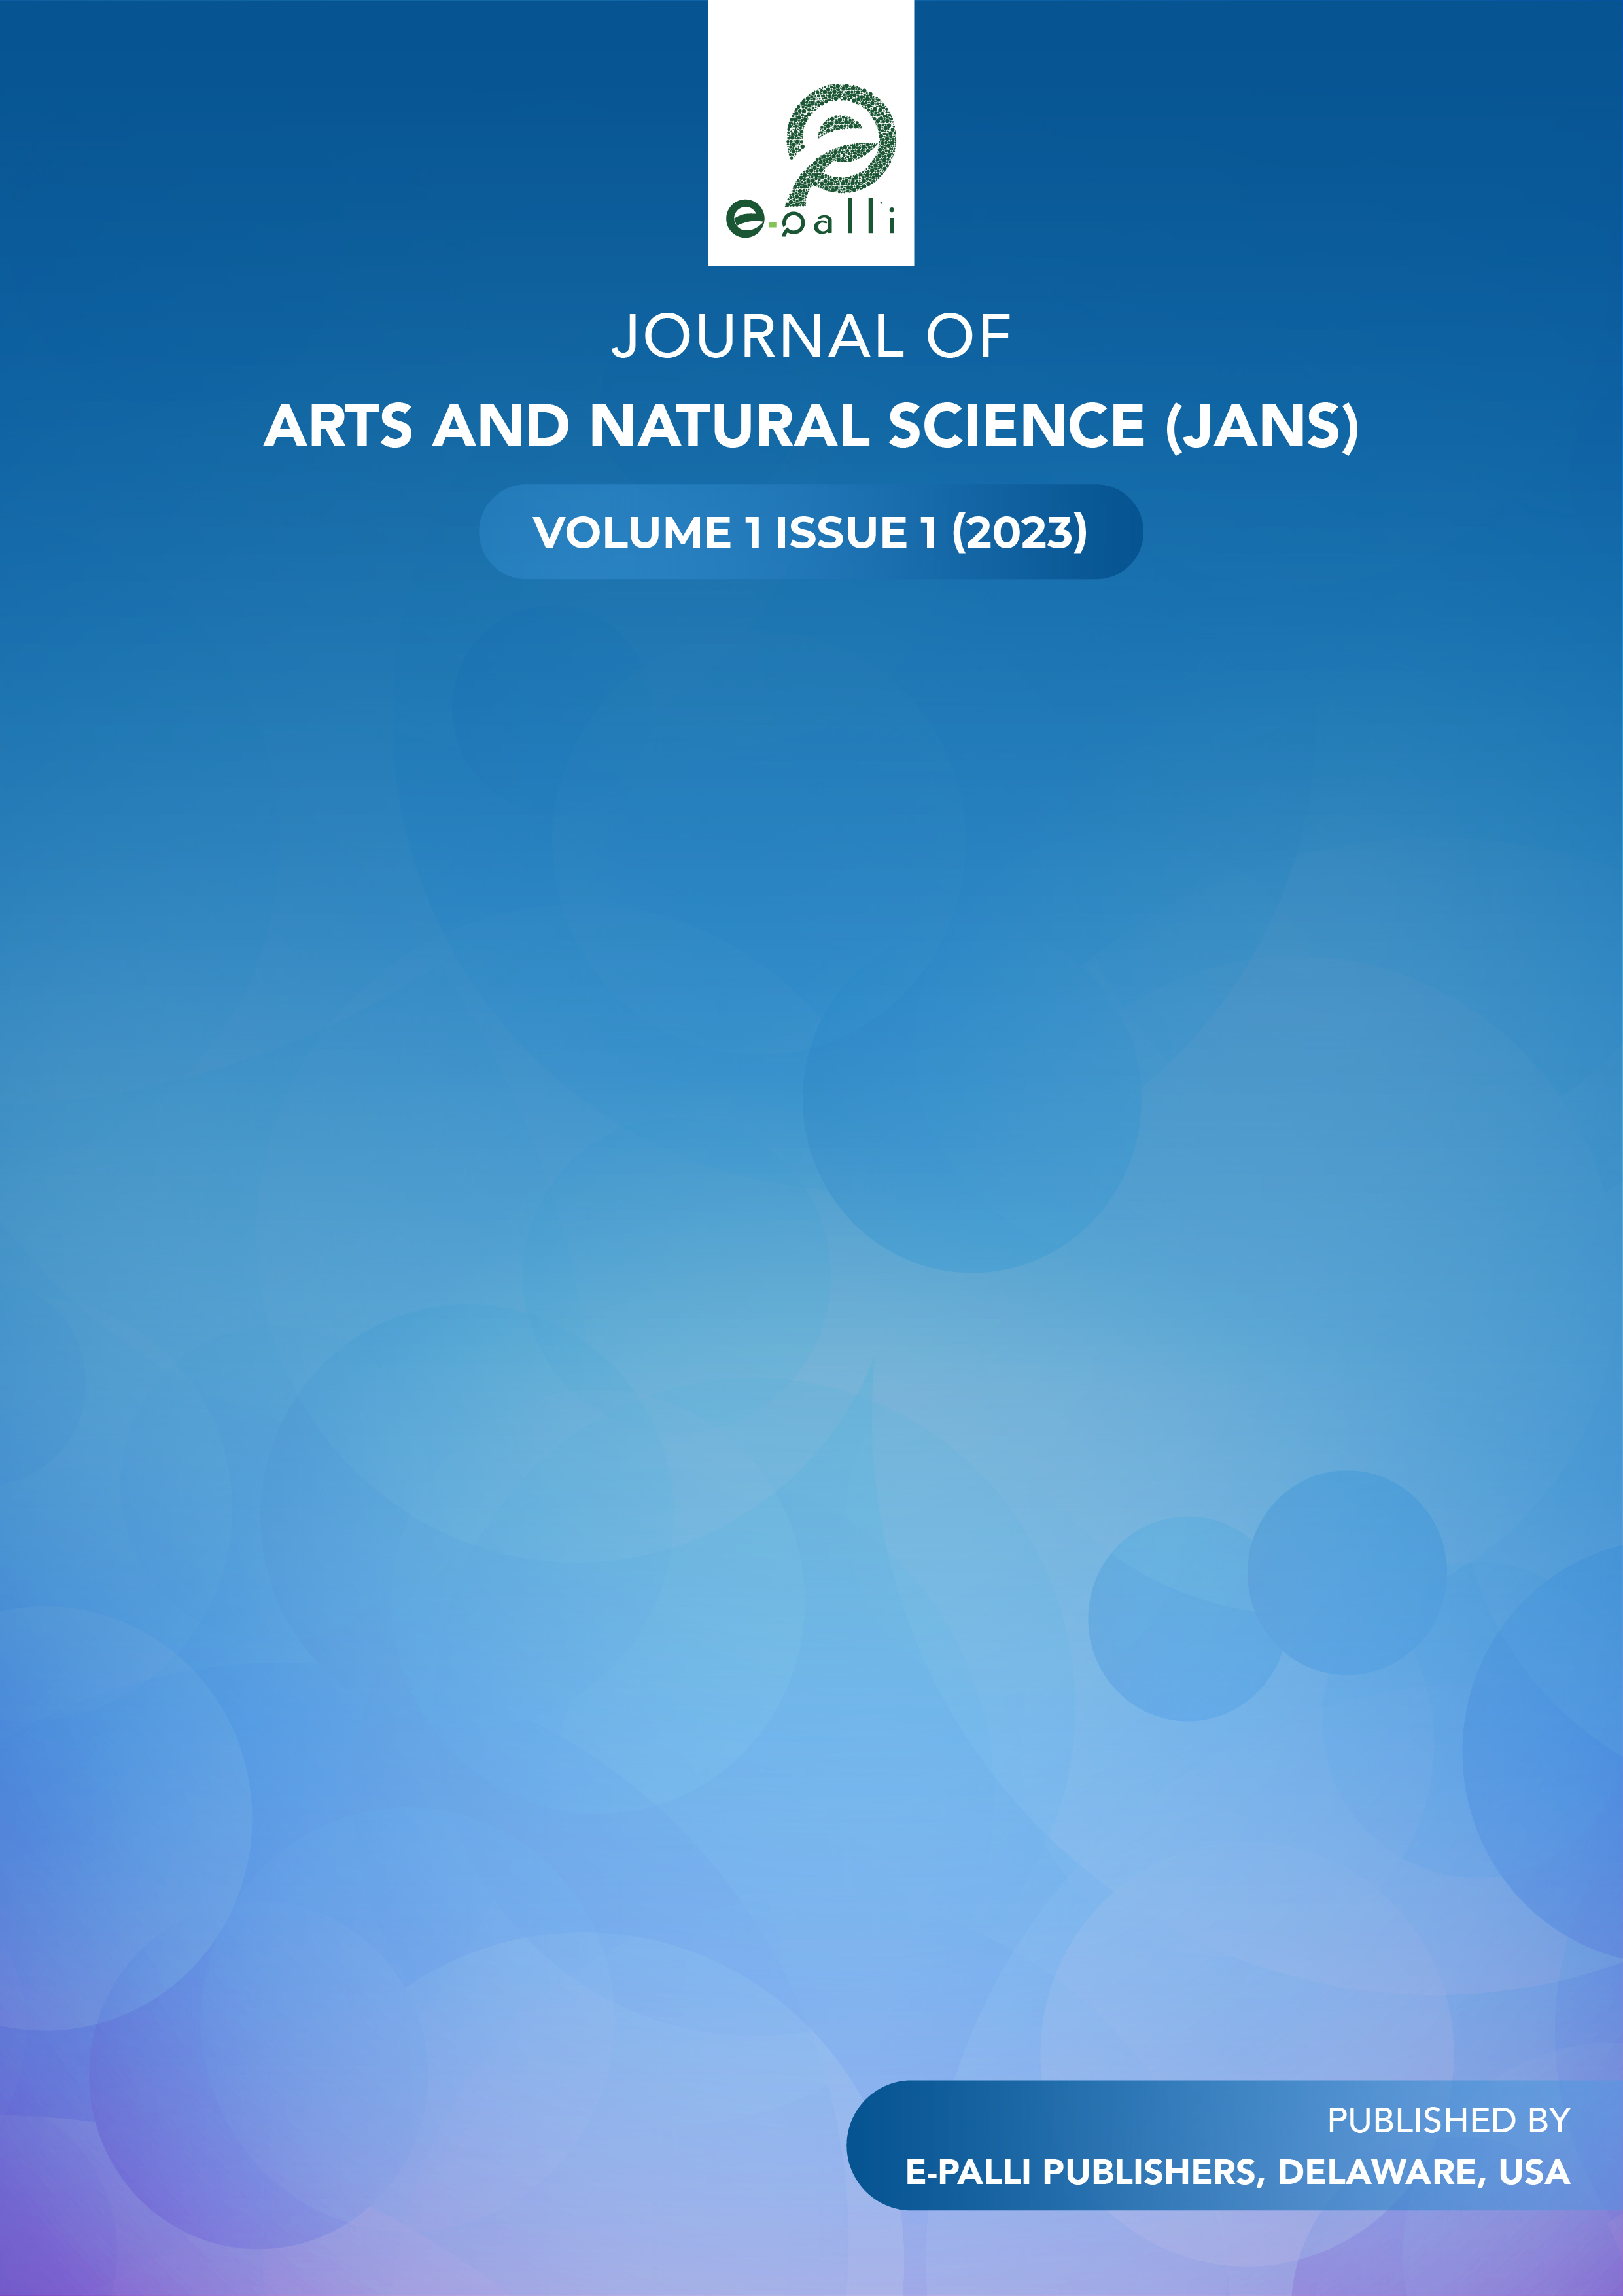 					View Vol. 1 No. 1 (2023): Journal of Arts and Natural Science
				